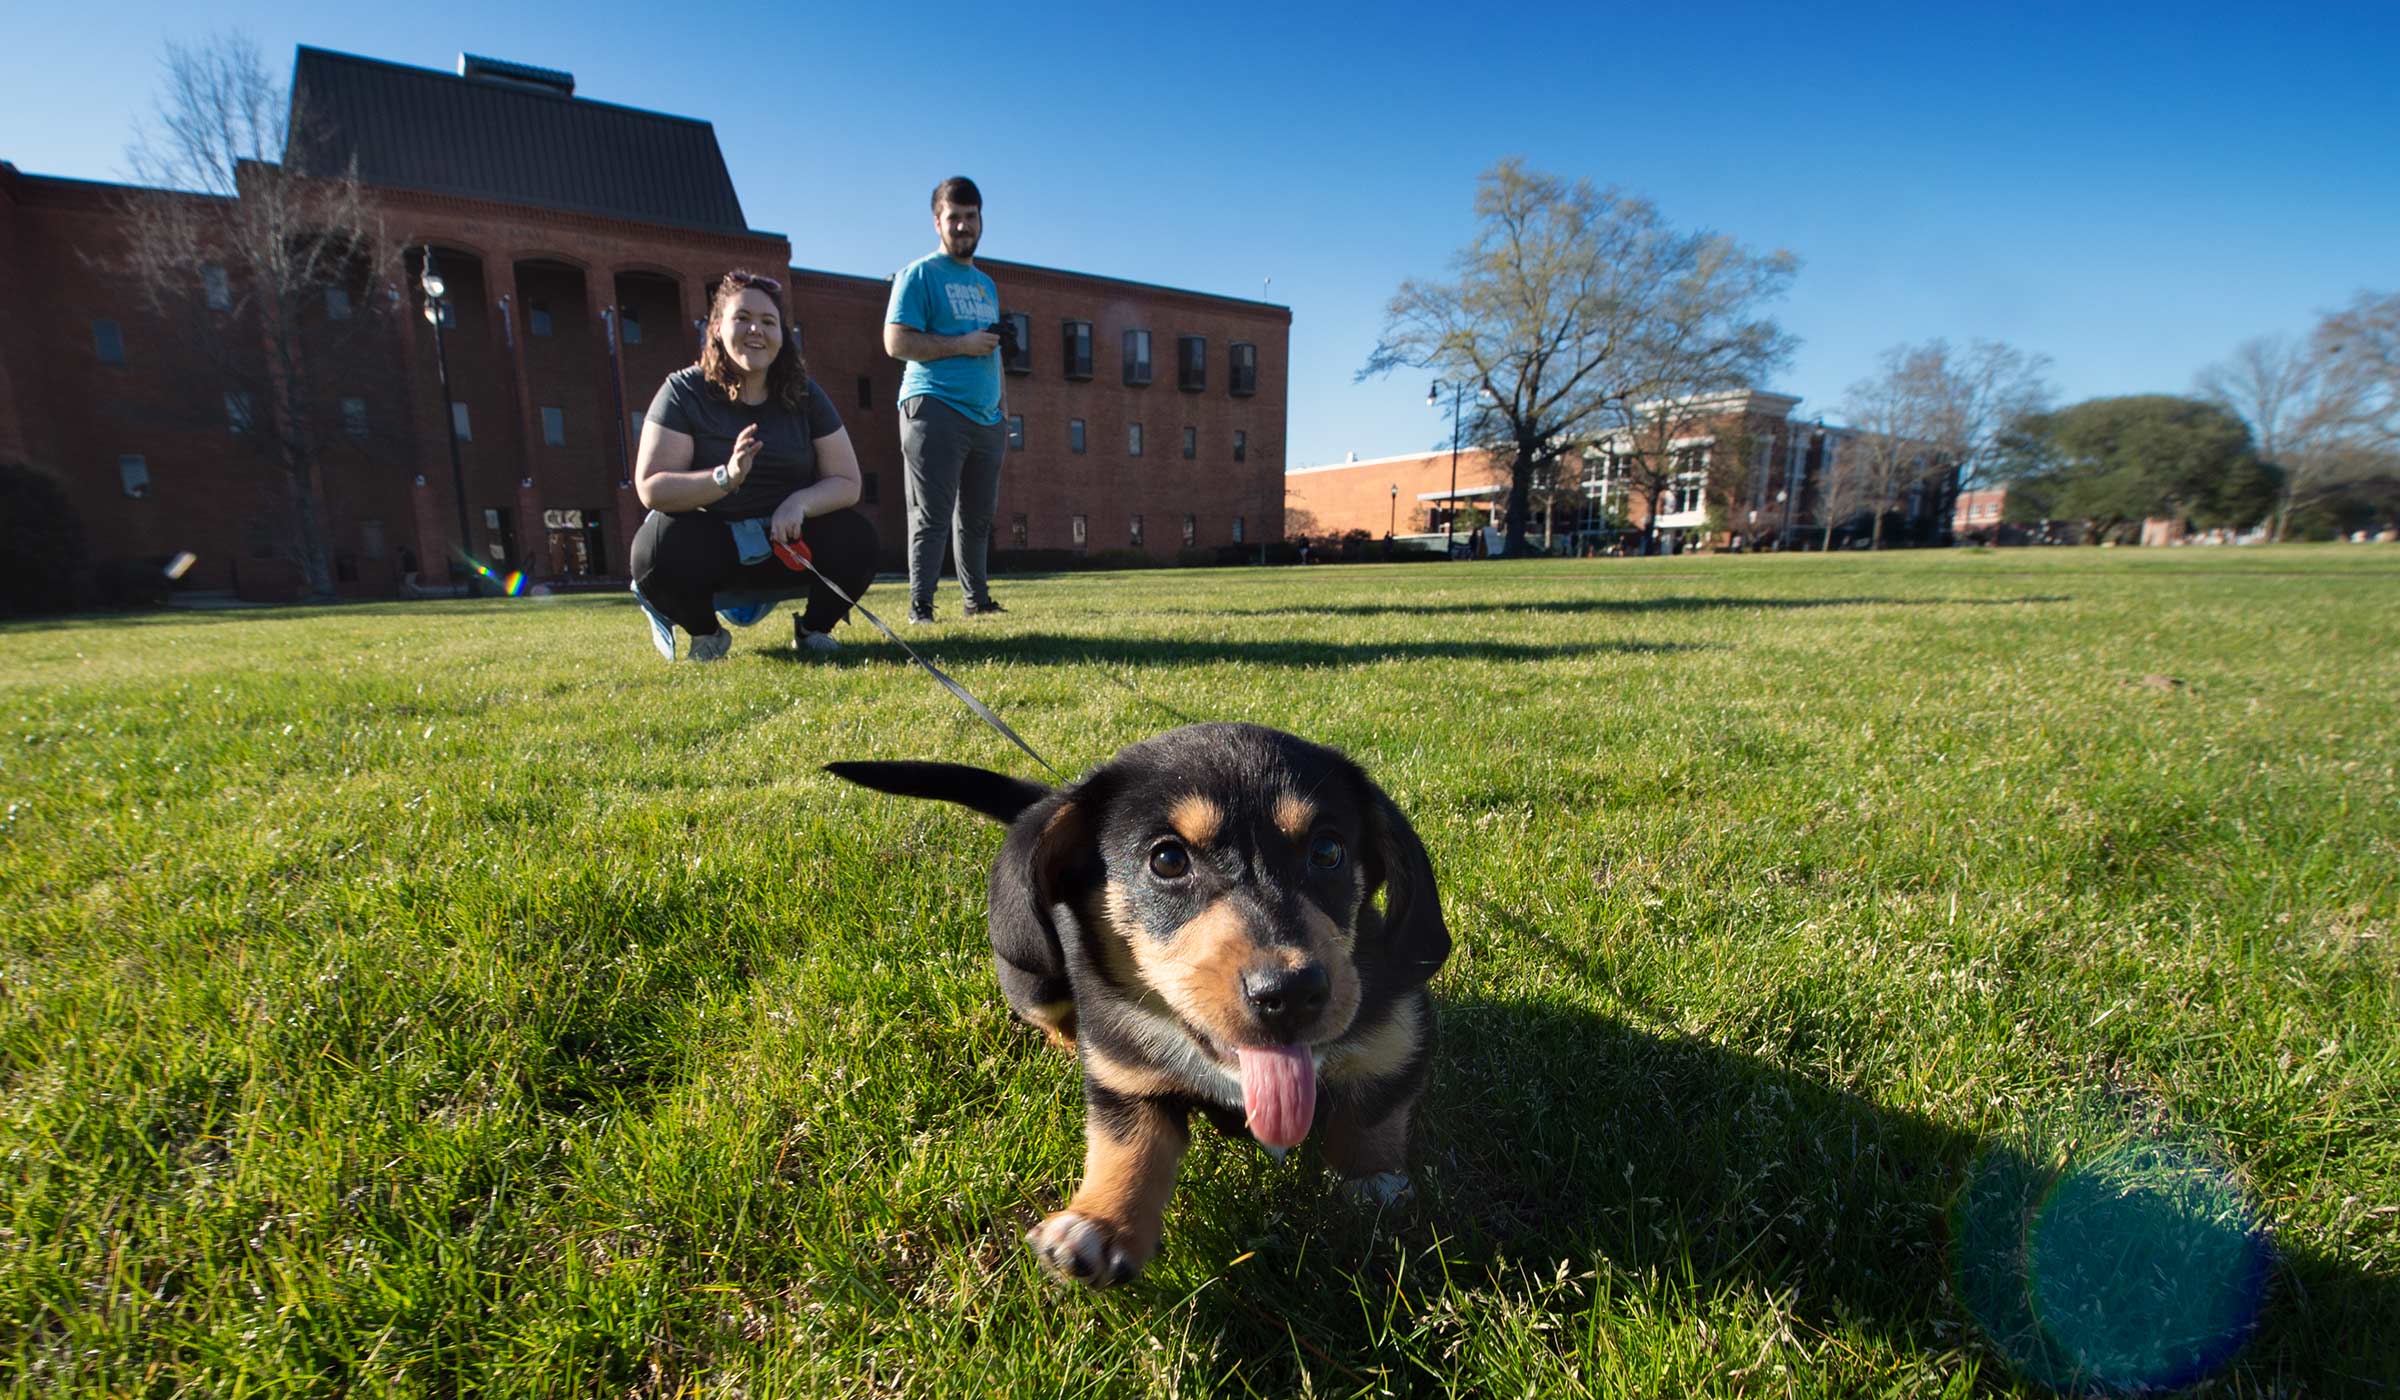 Surrounded by Drill Field green grass, a 10 week old puppy with dachsand proportions strains from its leash towards the camera with its tongue out.